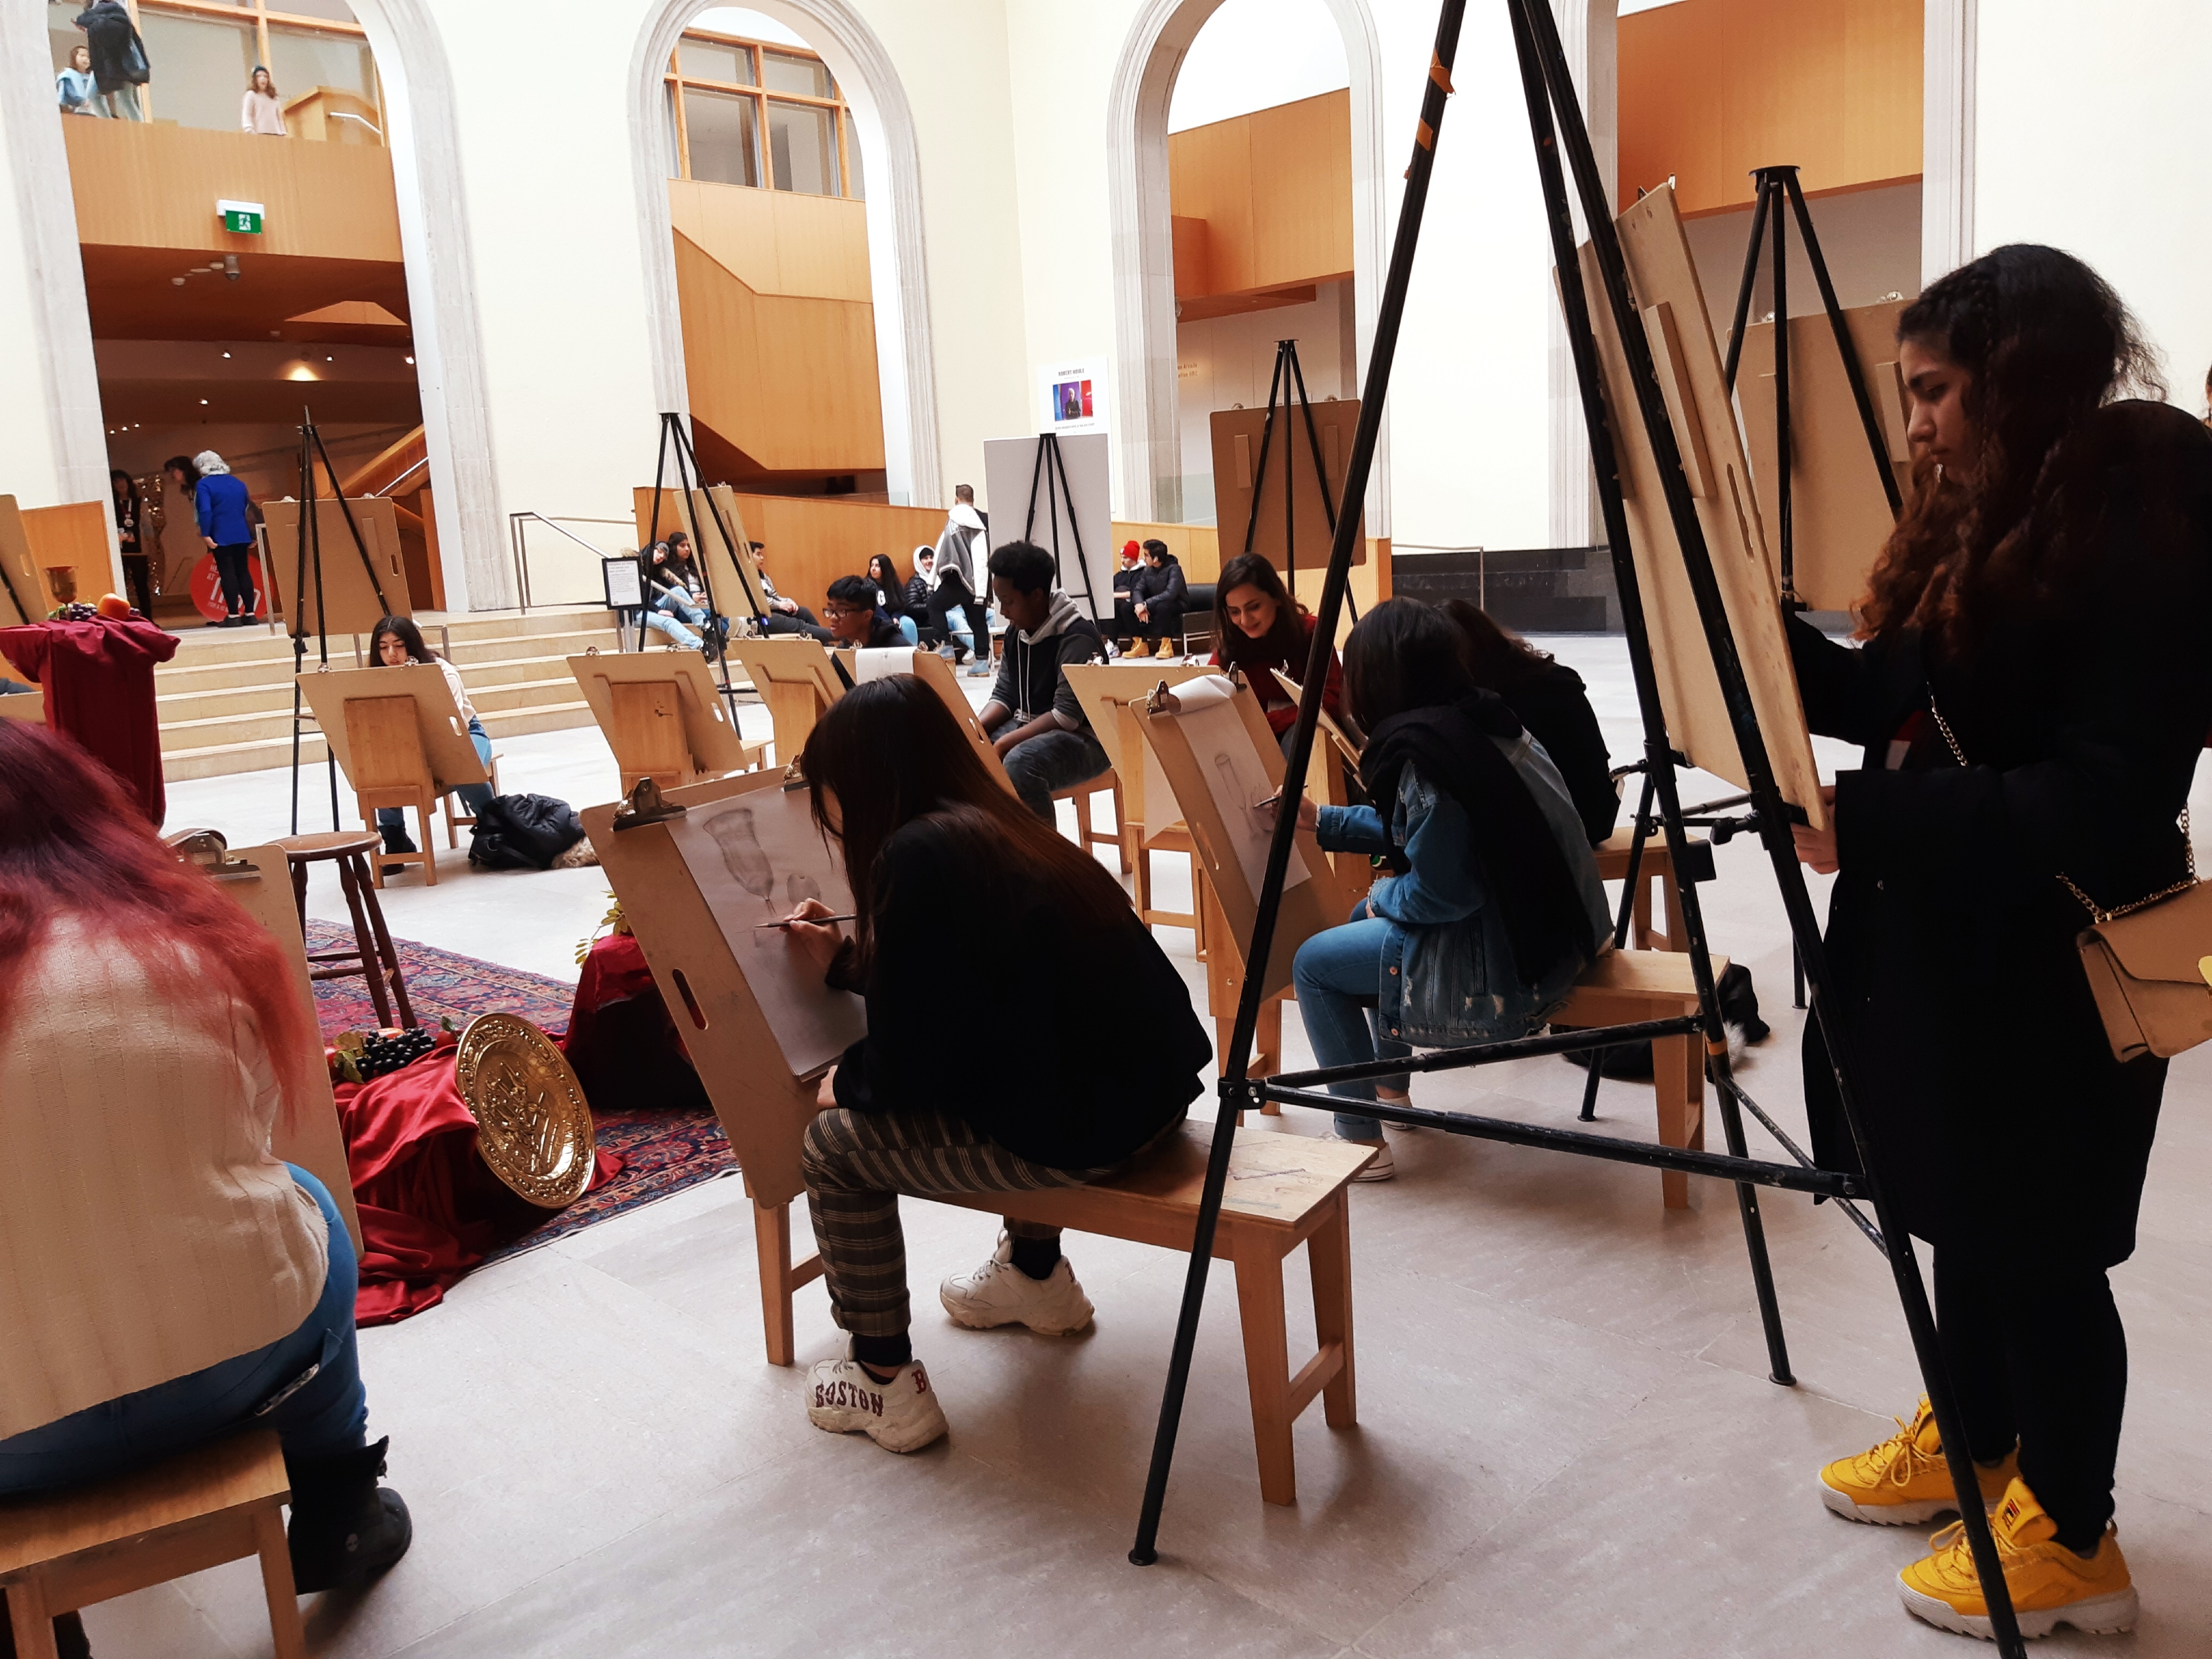 Pop-up Art Class at the AGO Open Gallery